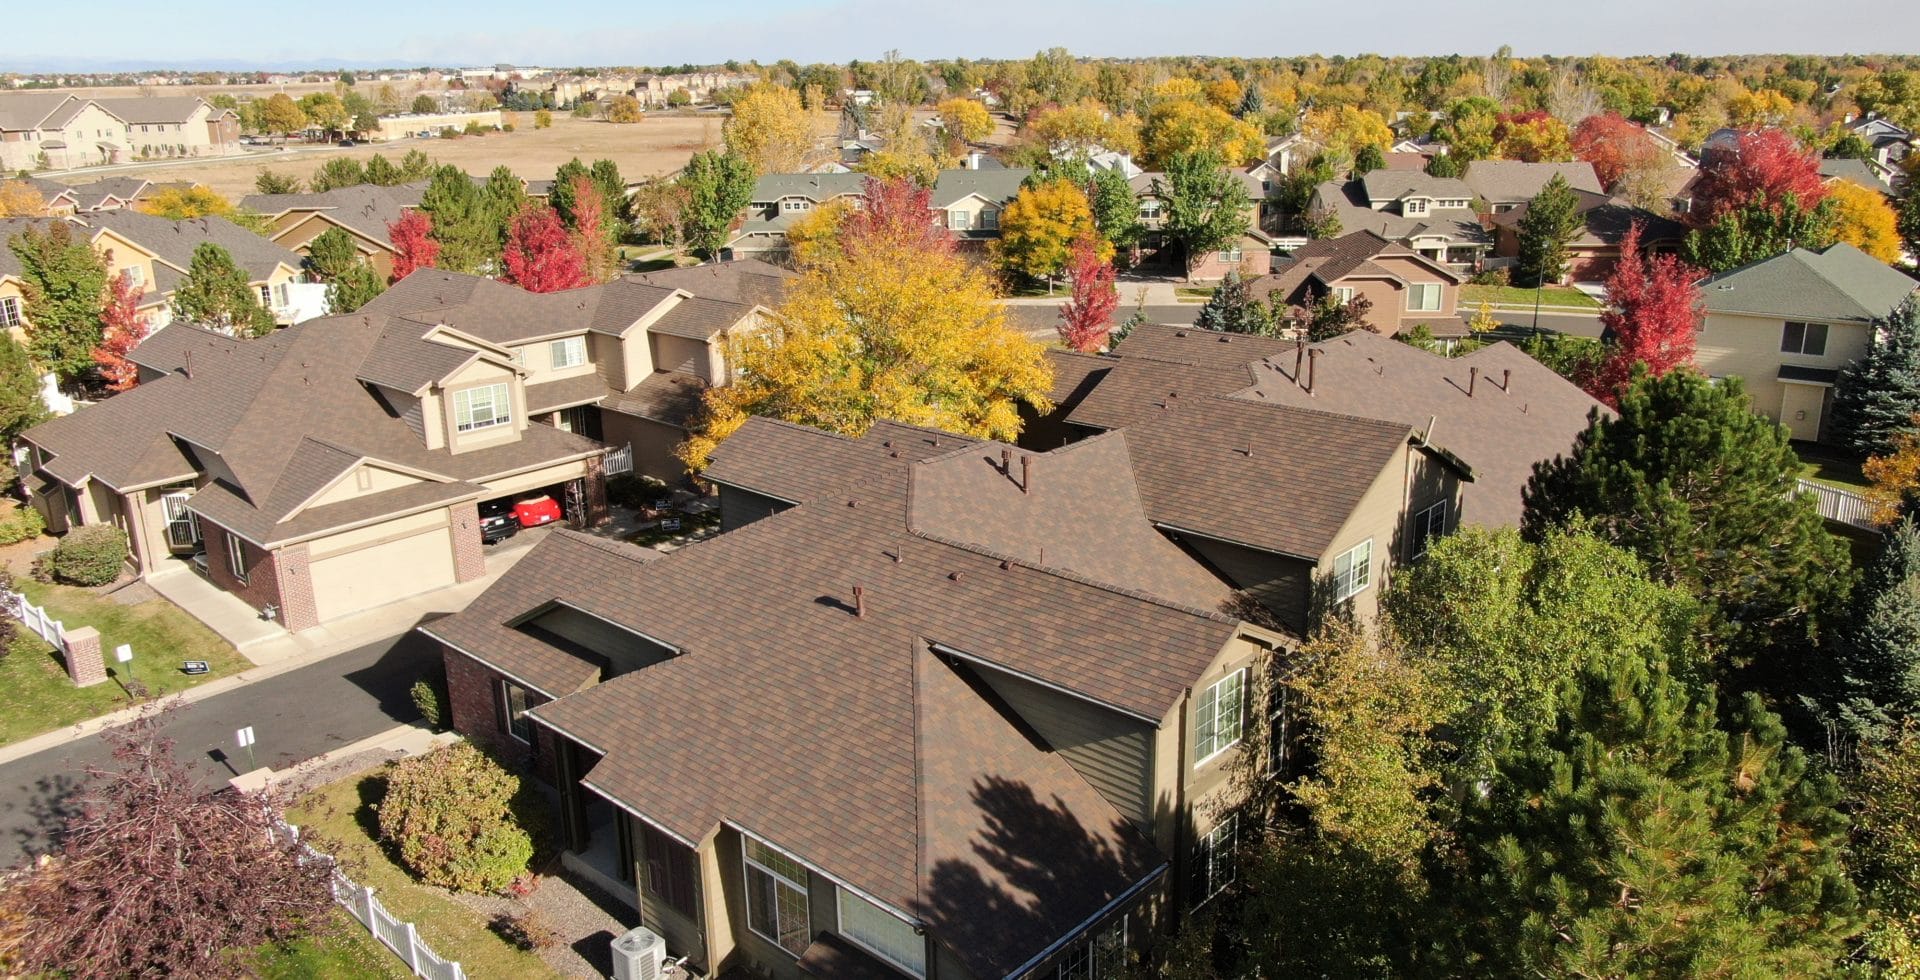 F Wave Synthetic Shingles Commercial Install at Gold Run Condominiums